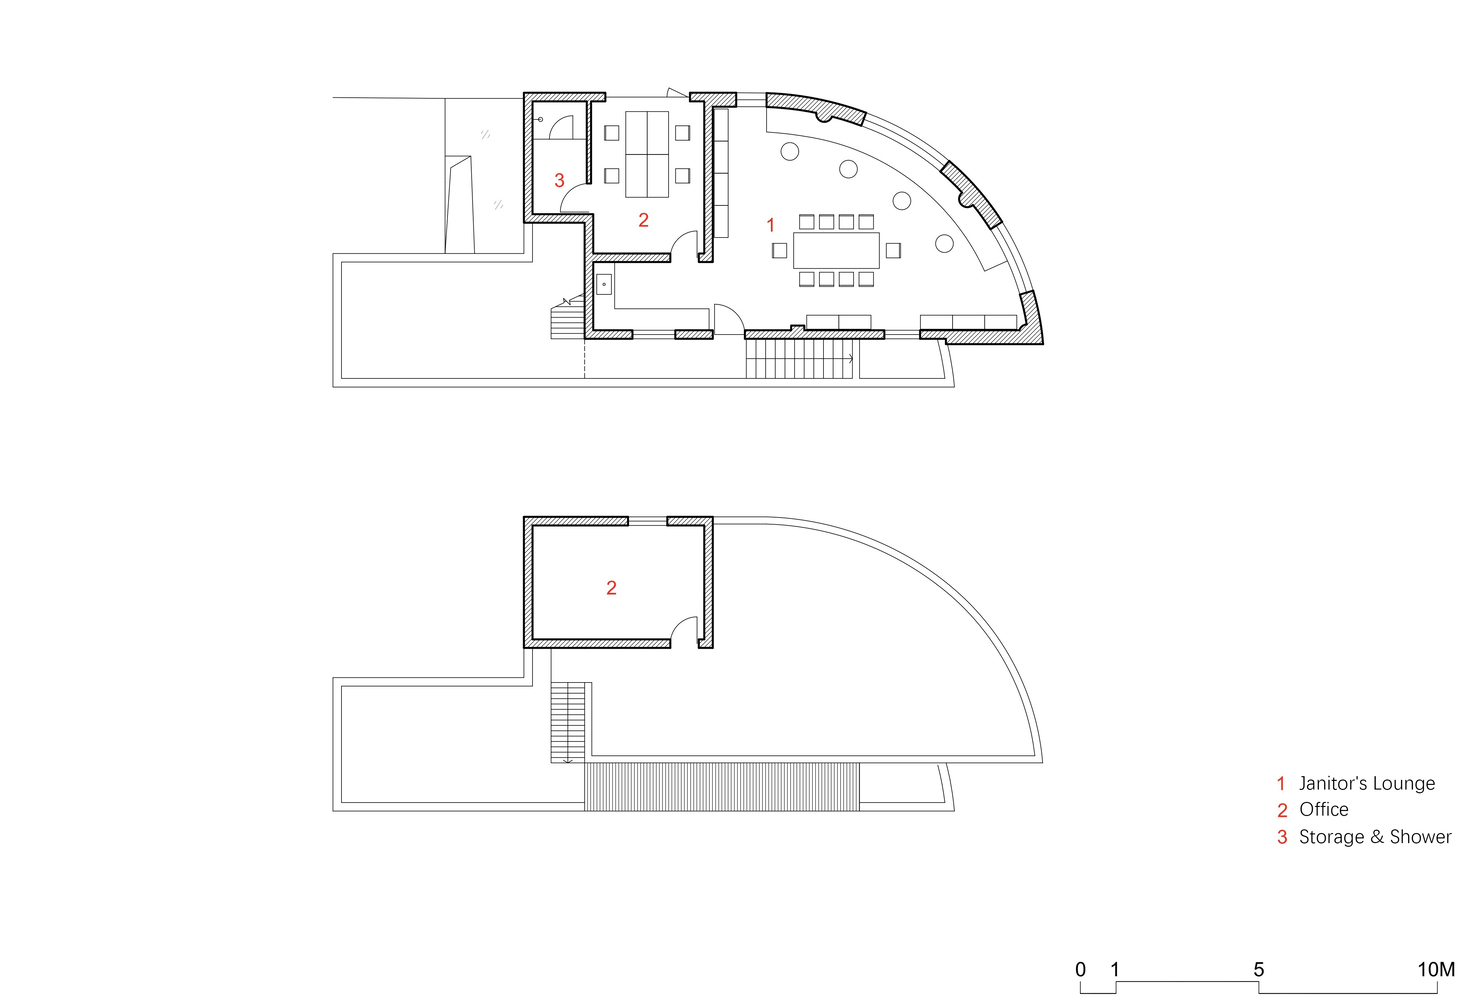 drawing-4-first-and-second-floor-plan-after-renovation-4.jpg